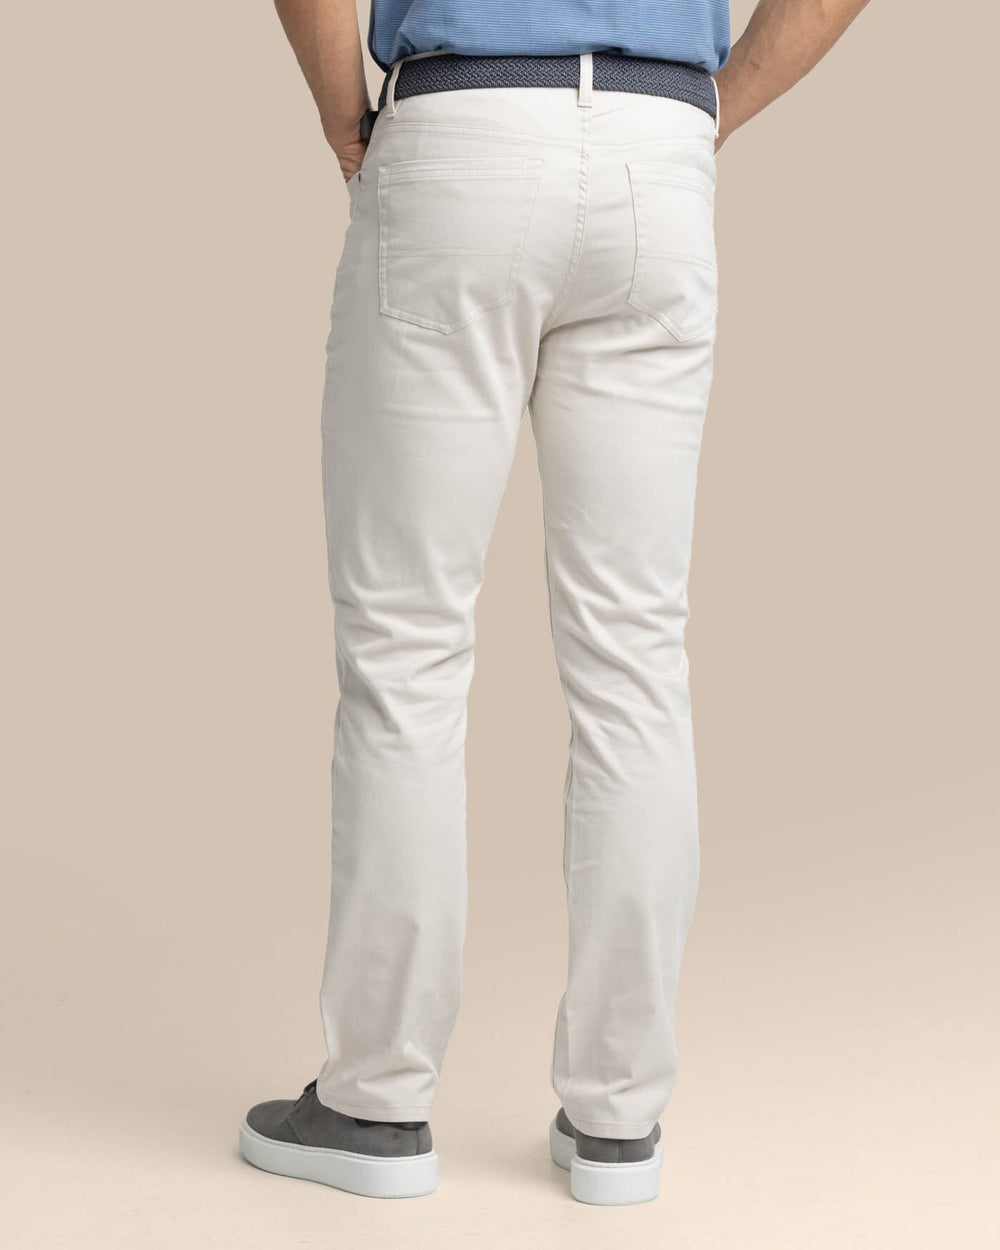 The back view of the Southern Tide Sullivan Five Pocket Pant Stone by Southern Tide - Stone